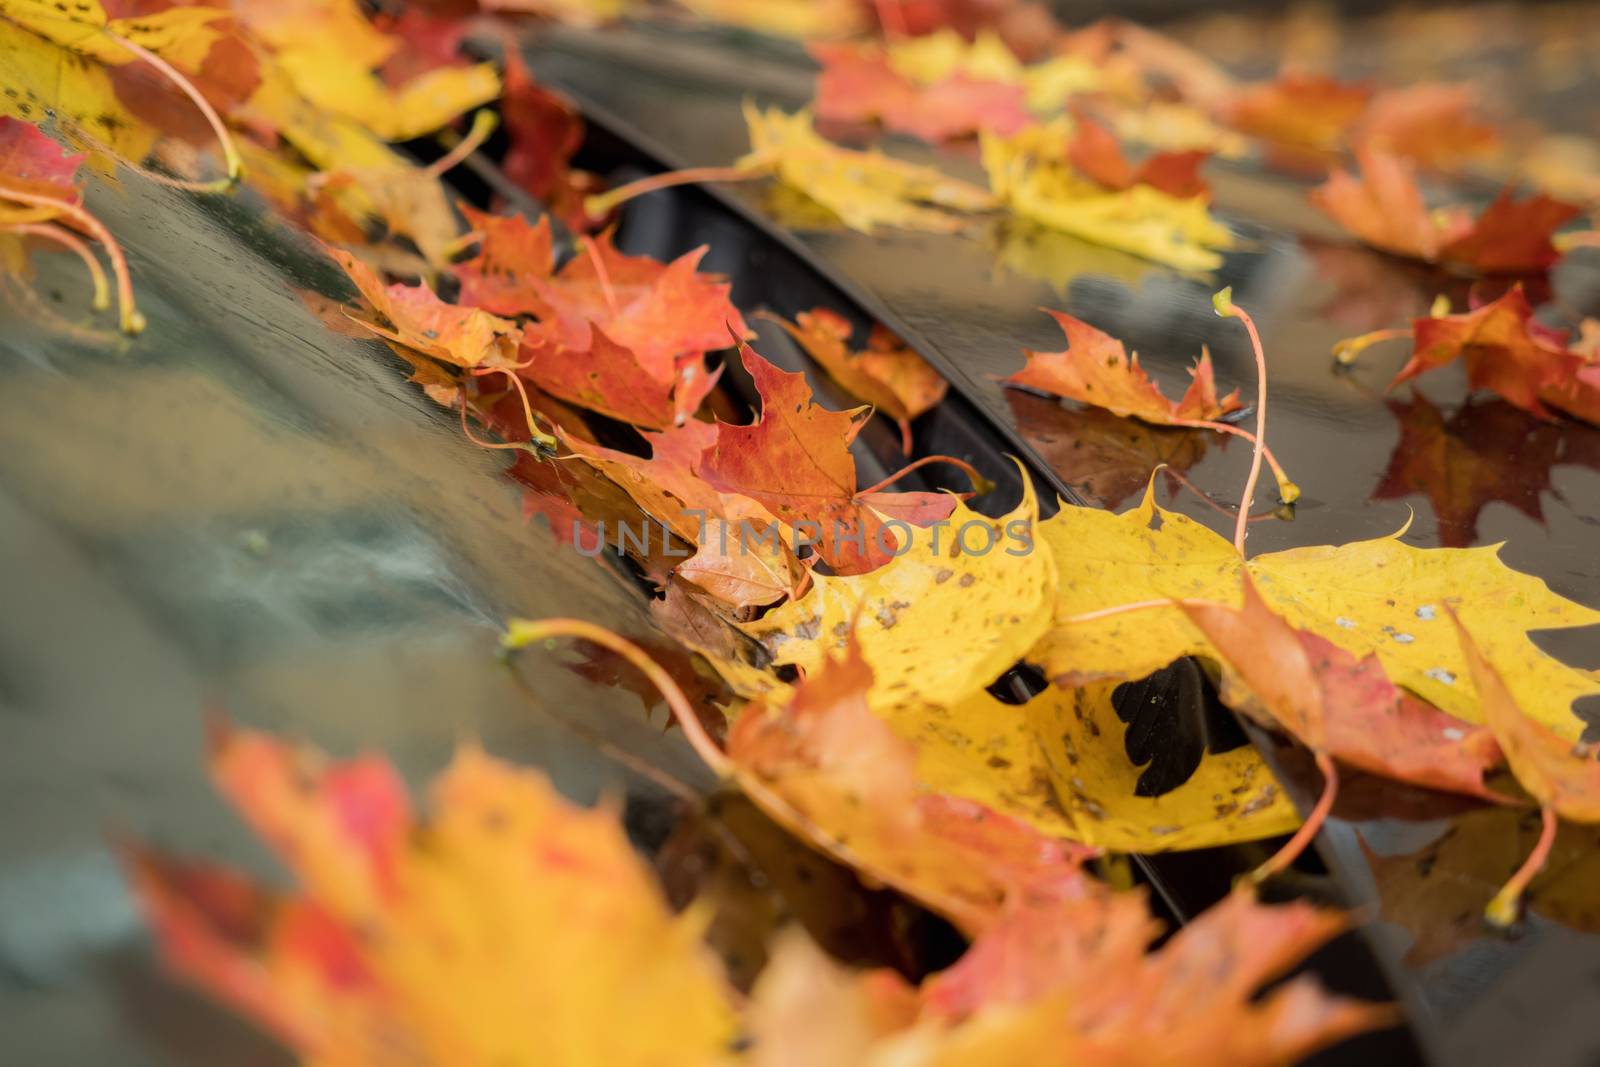 Many leaves on a car in autumn